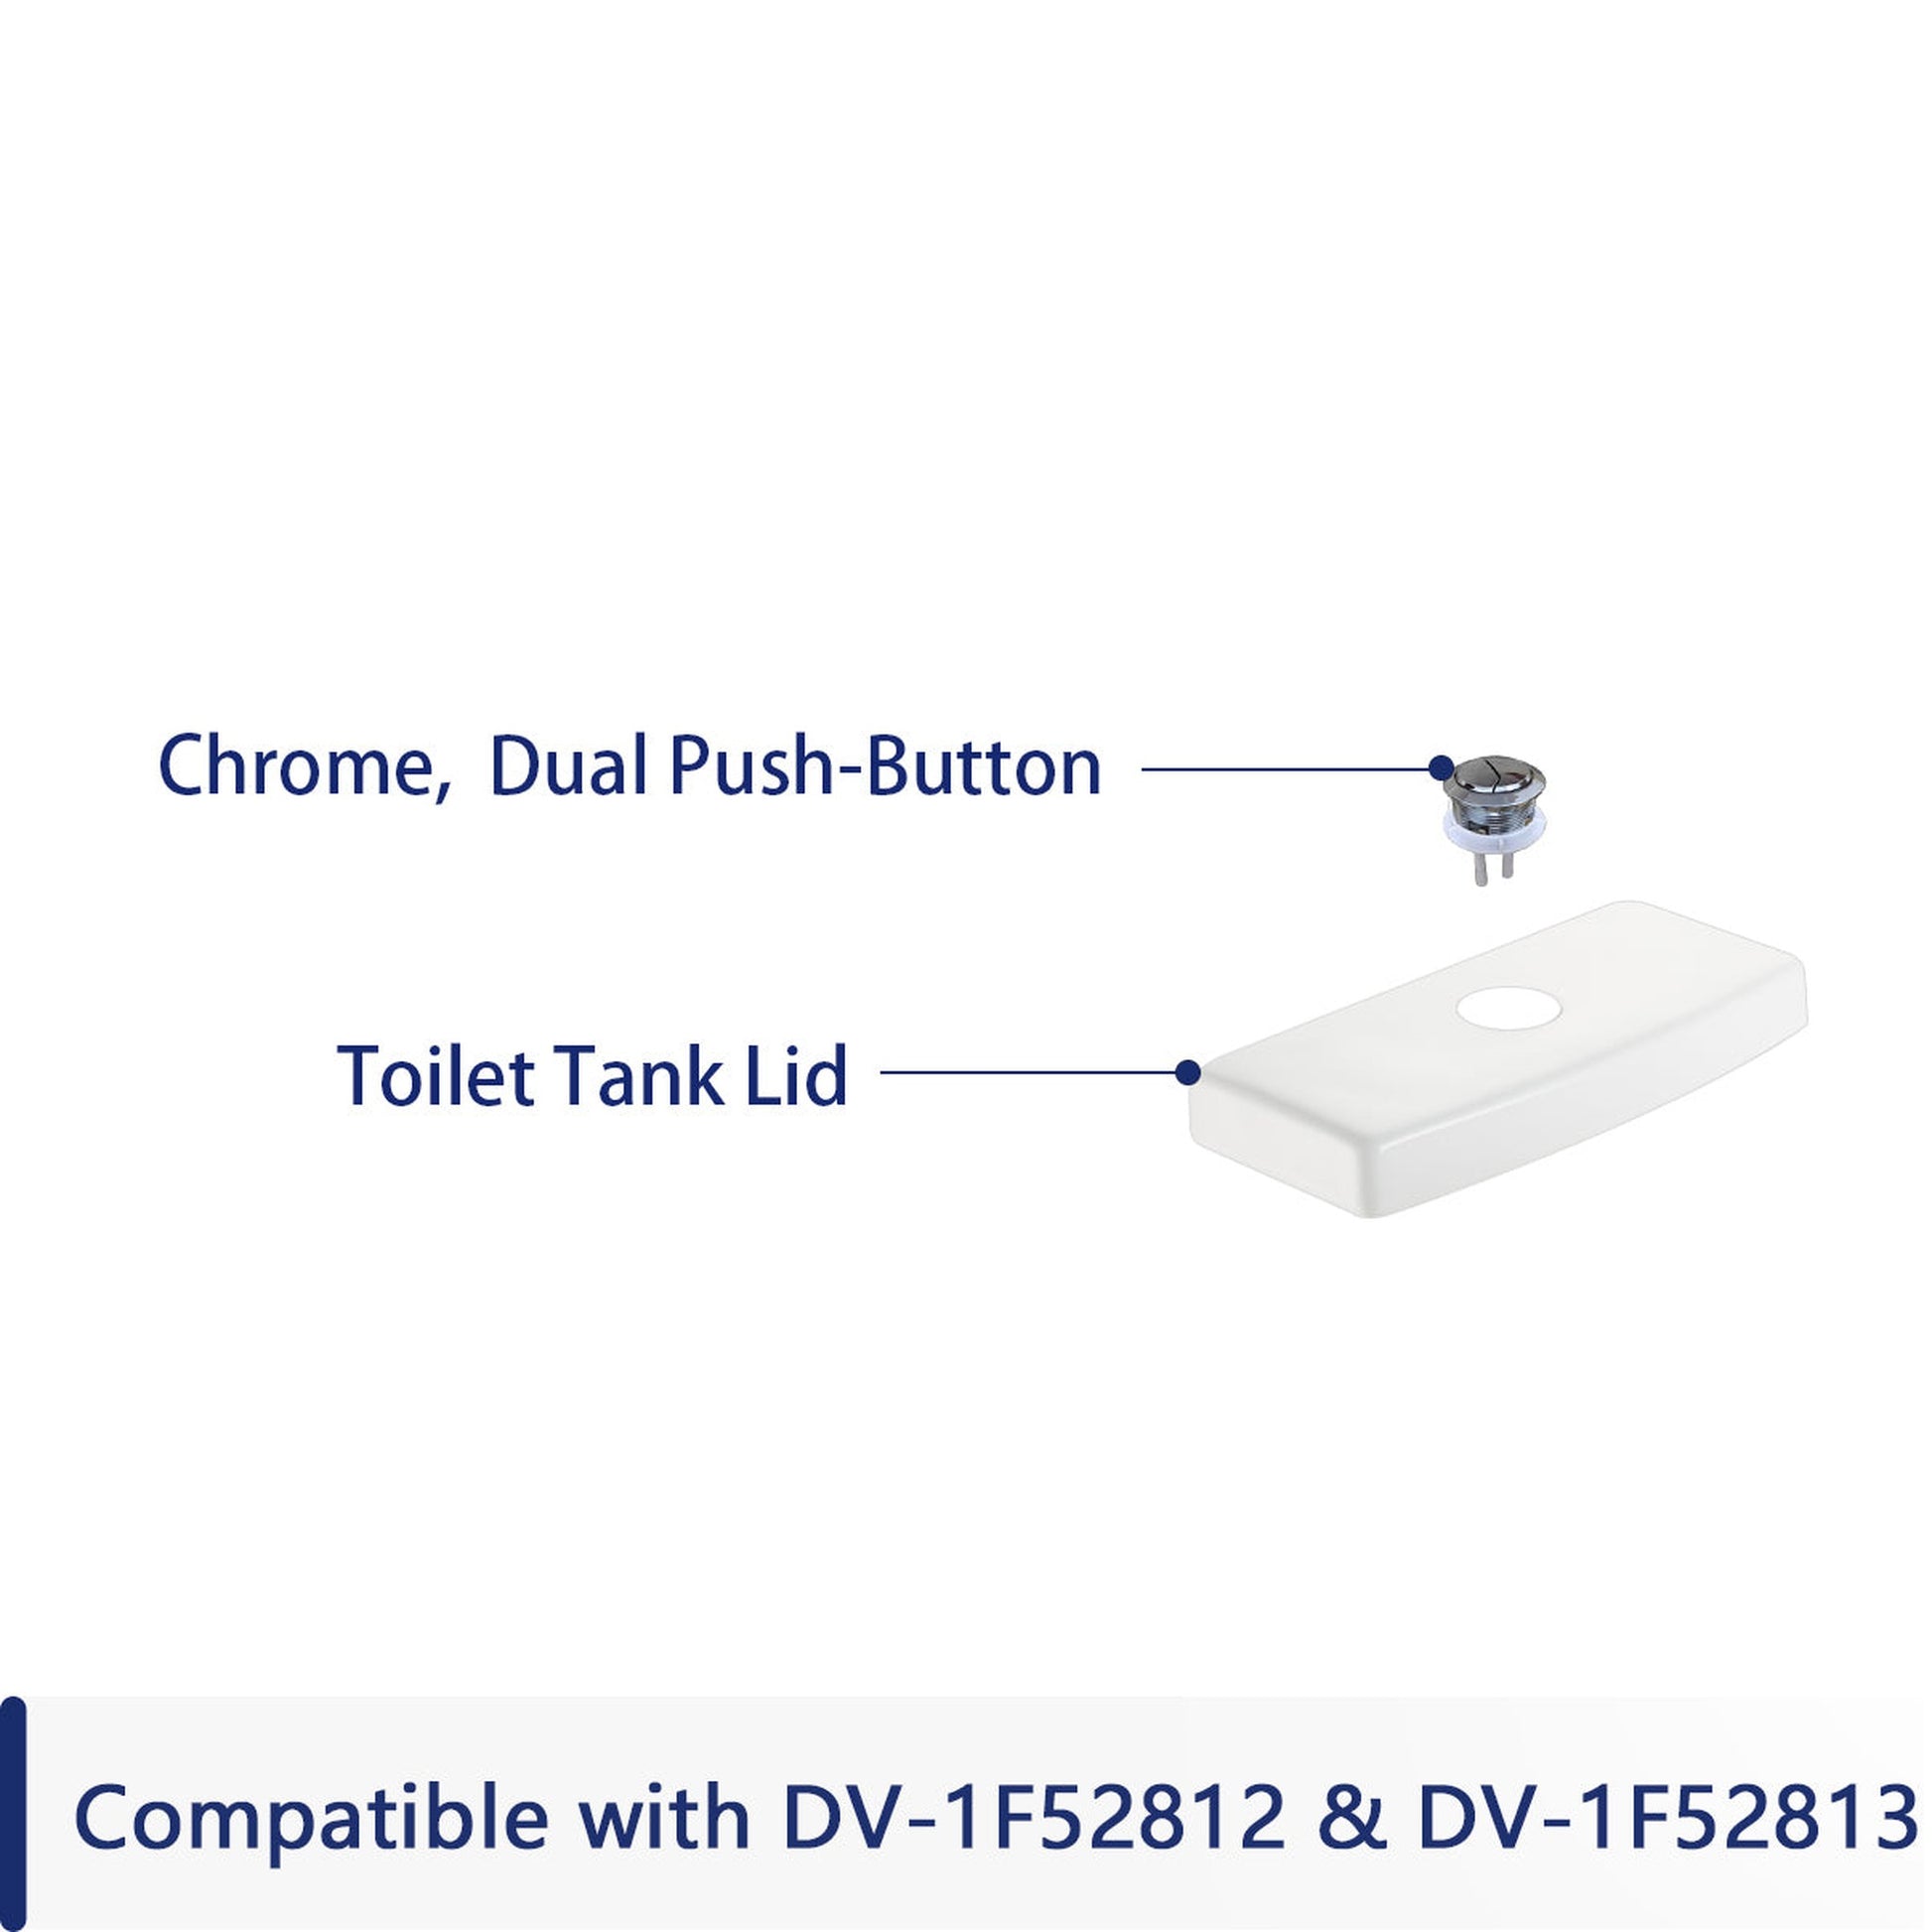 DeerValley Tank Lid (Not with a flush button, compatible with DV-1F52812 and DV-1F52813)